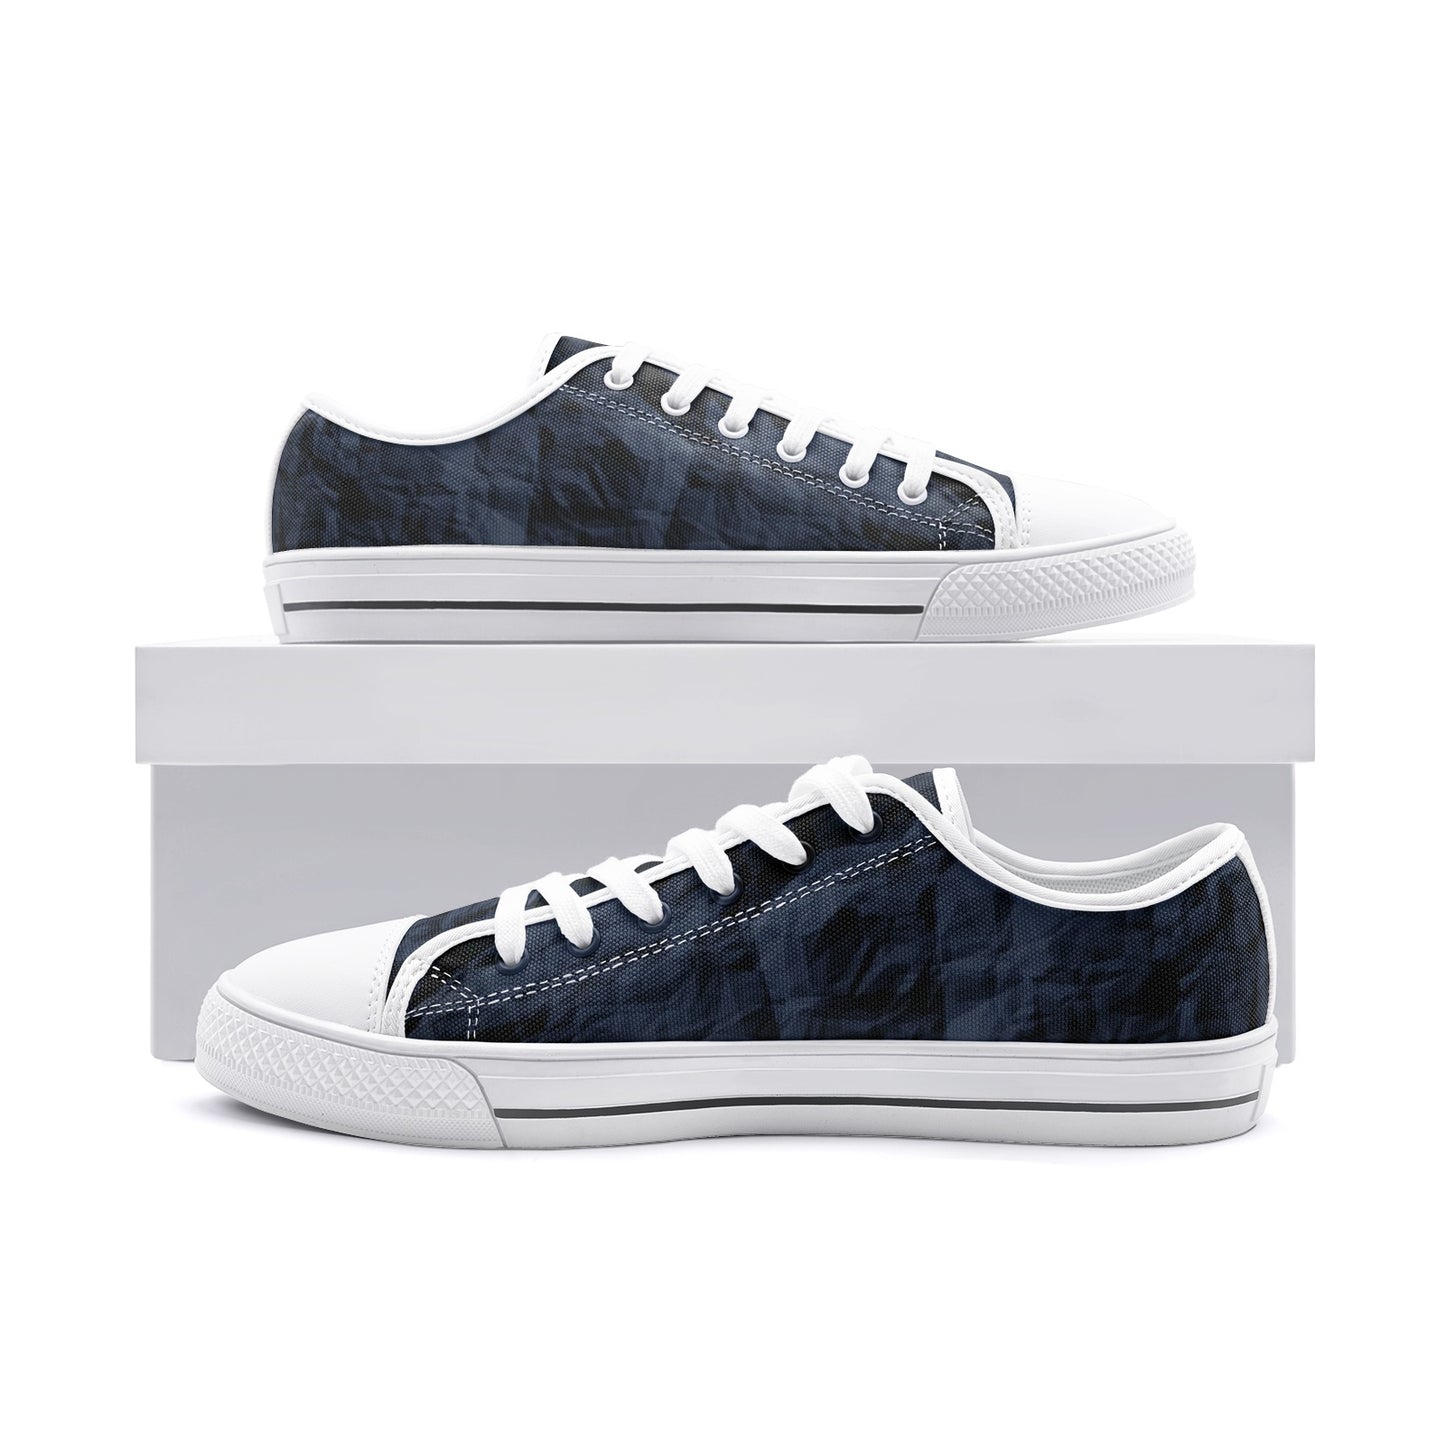 Unisex Low Top Canvas Shoes Printy6